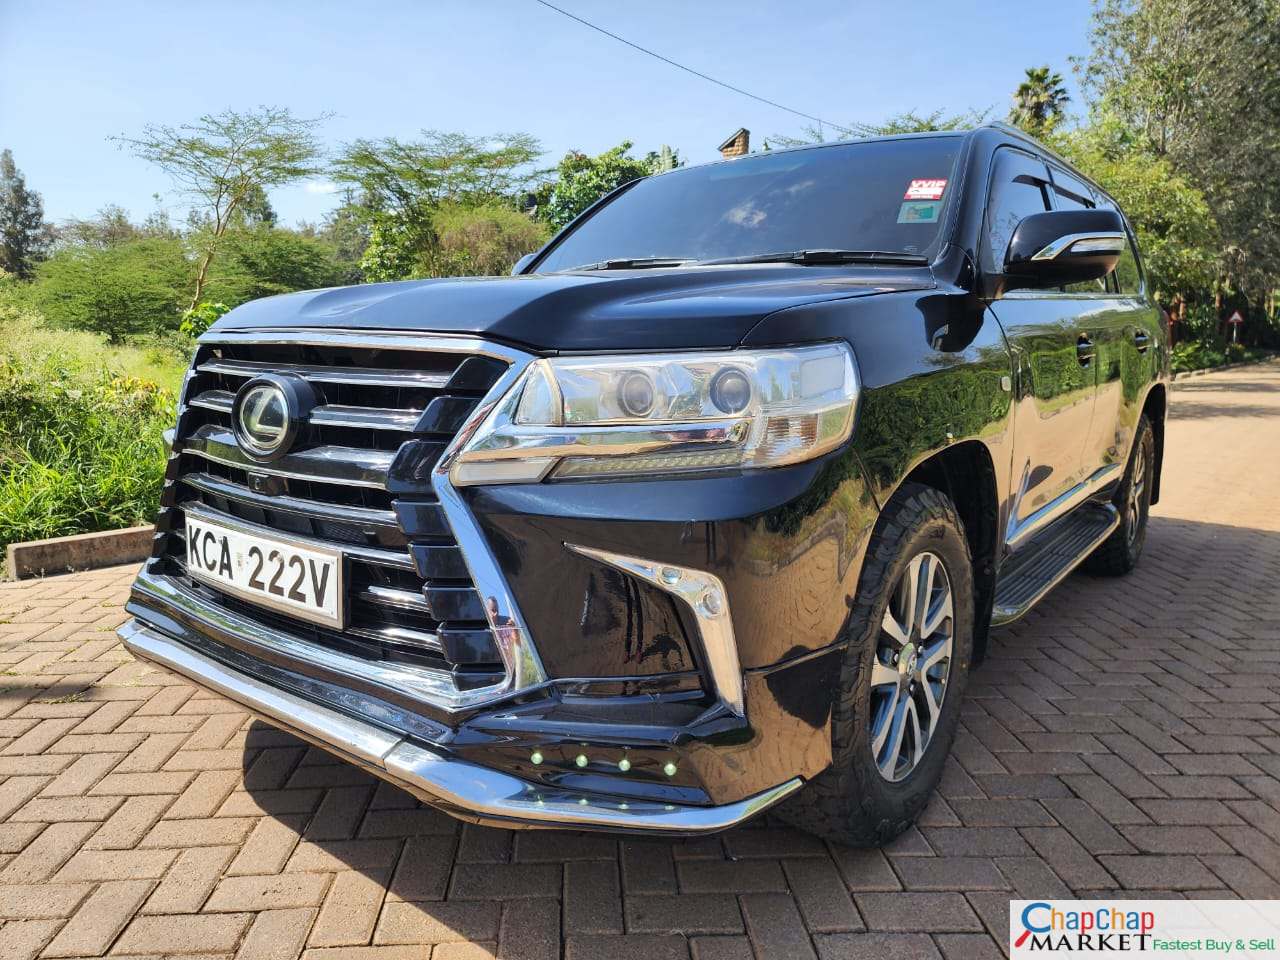 Toyota Land cruiser V8 as lx 570 facelift Cheapest You Pay 30% DEPOSIT Exclusive (SOLD)